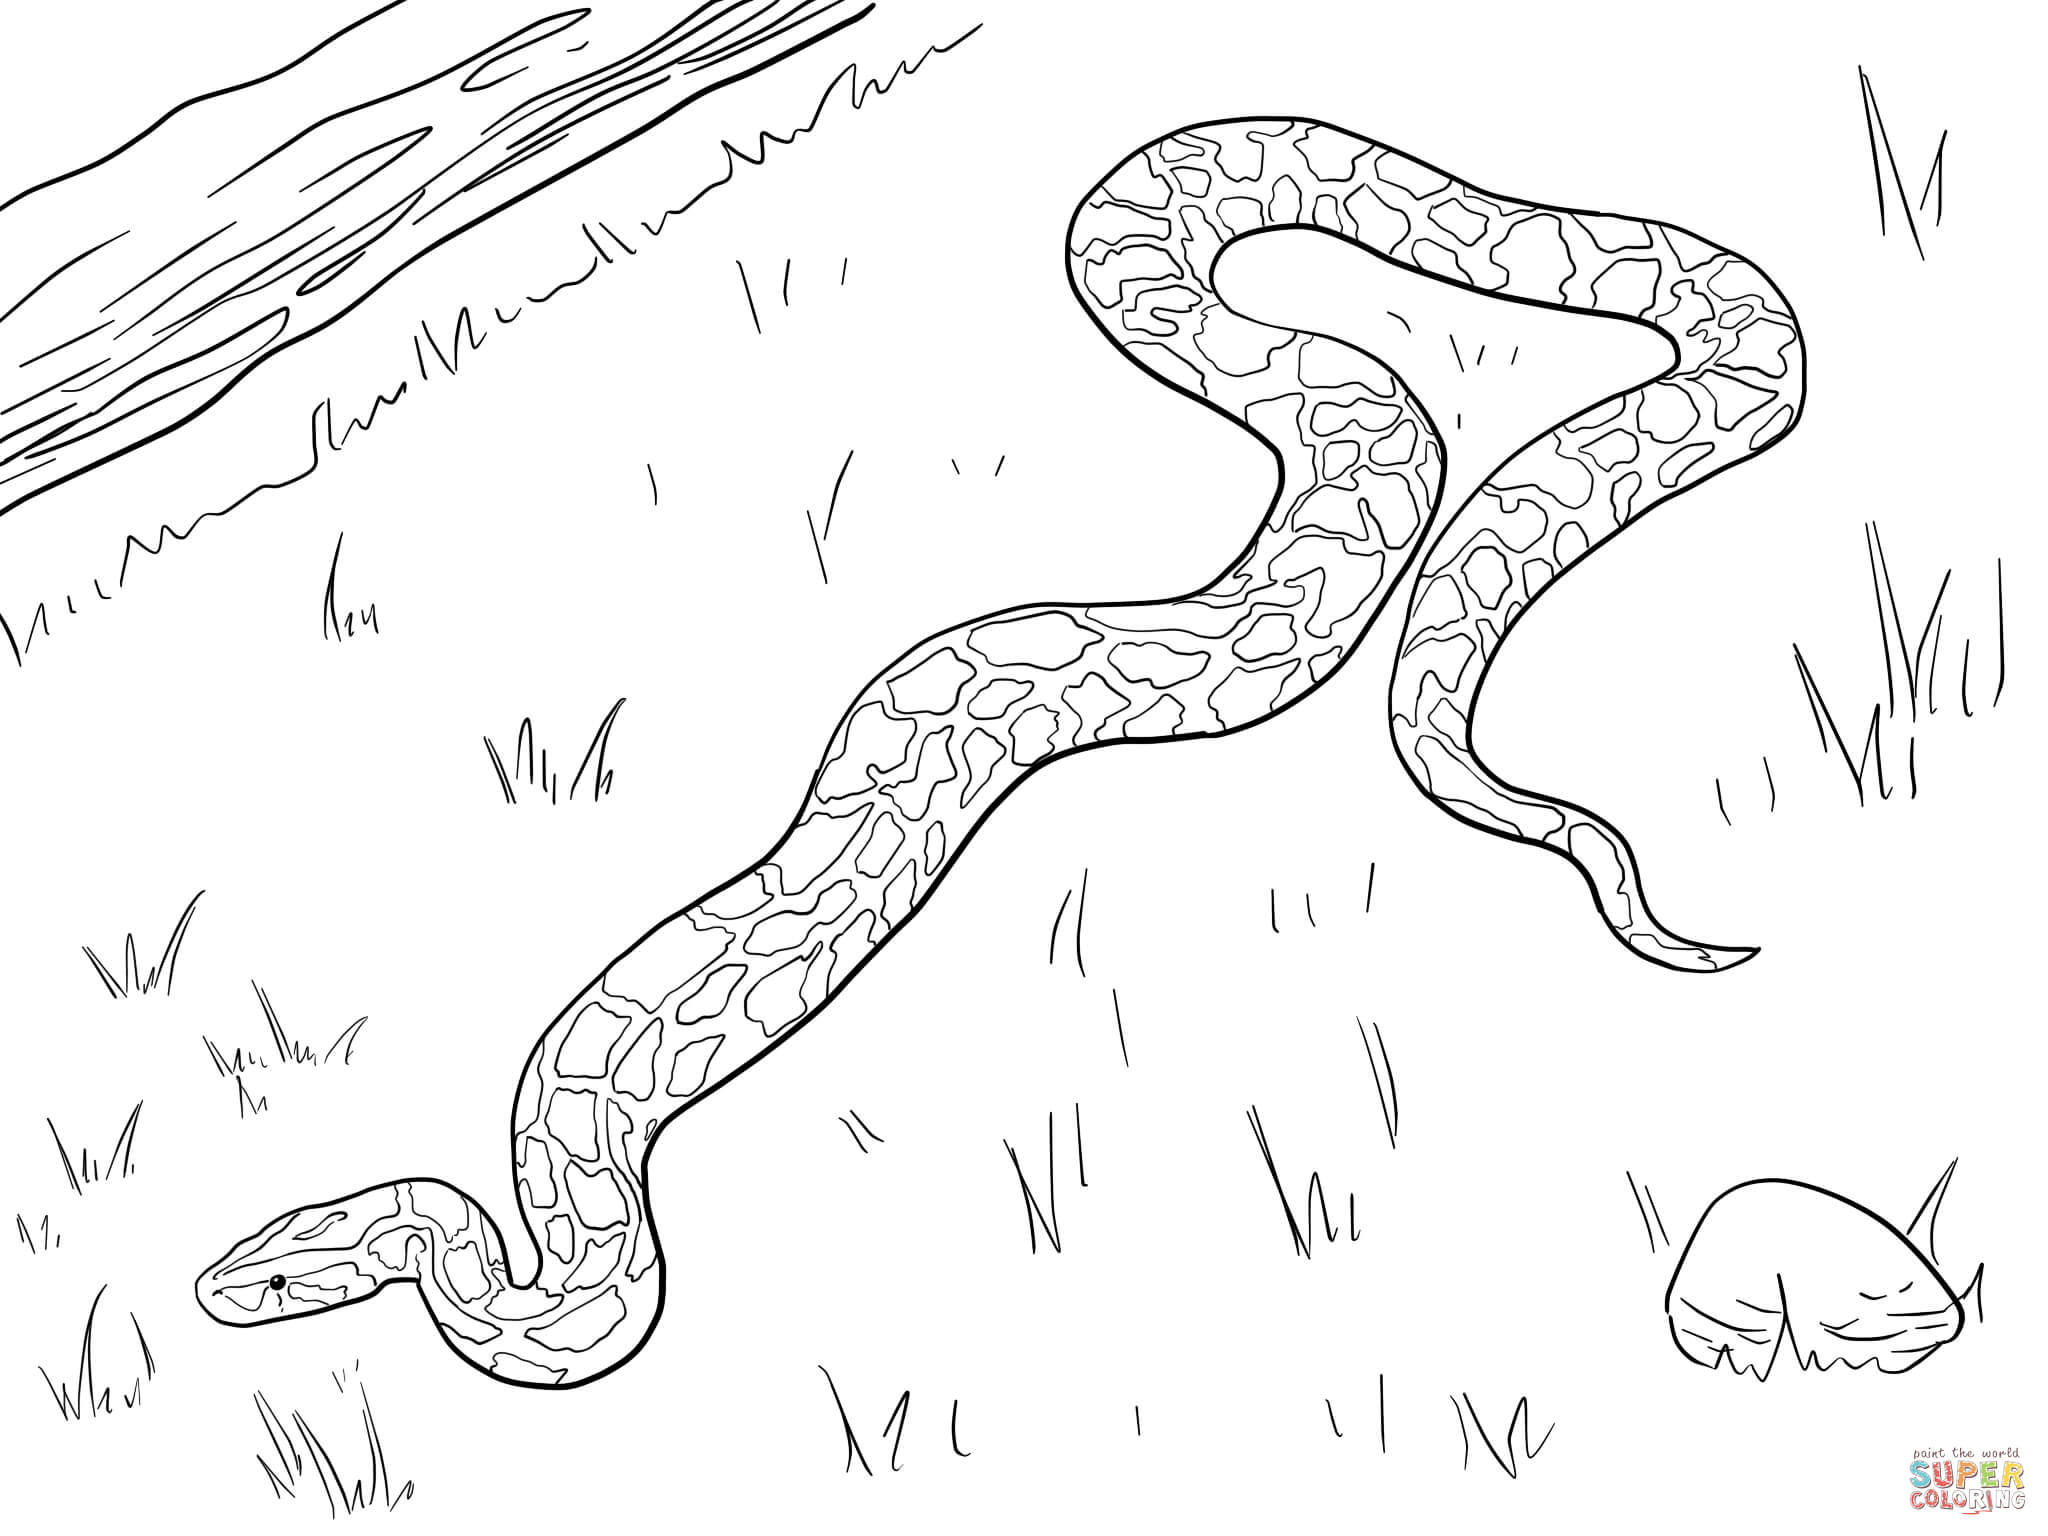 White Python coloring #18, Download drawings